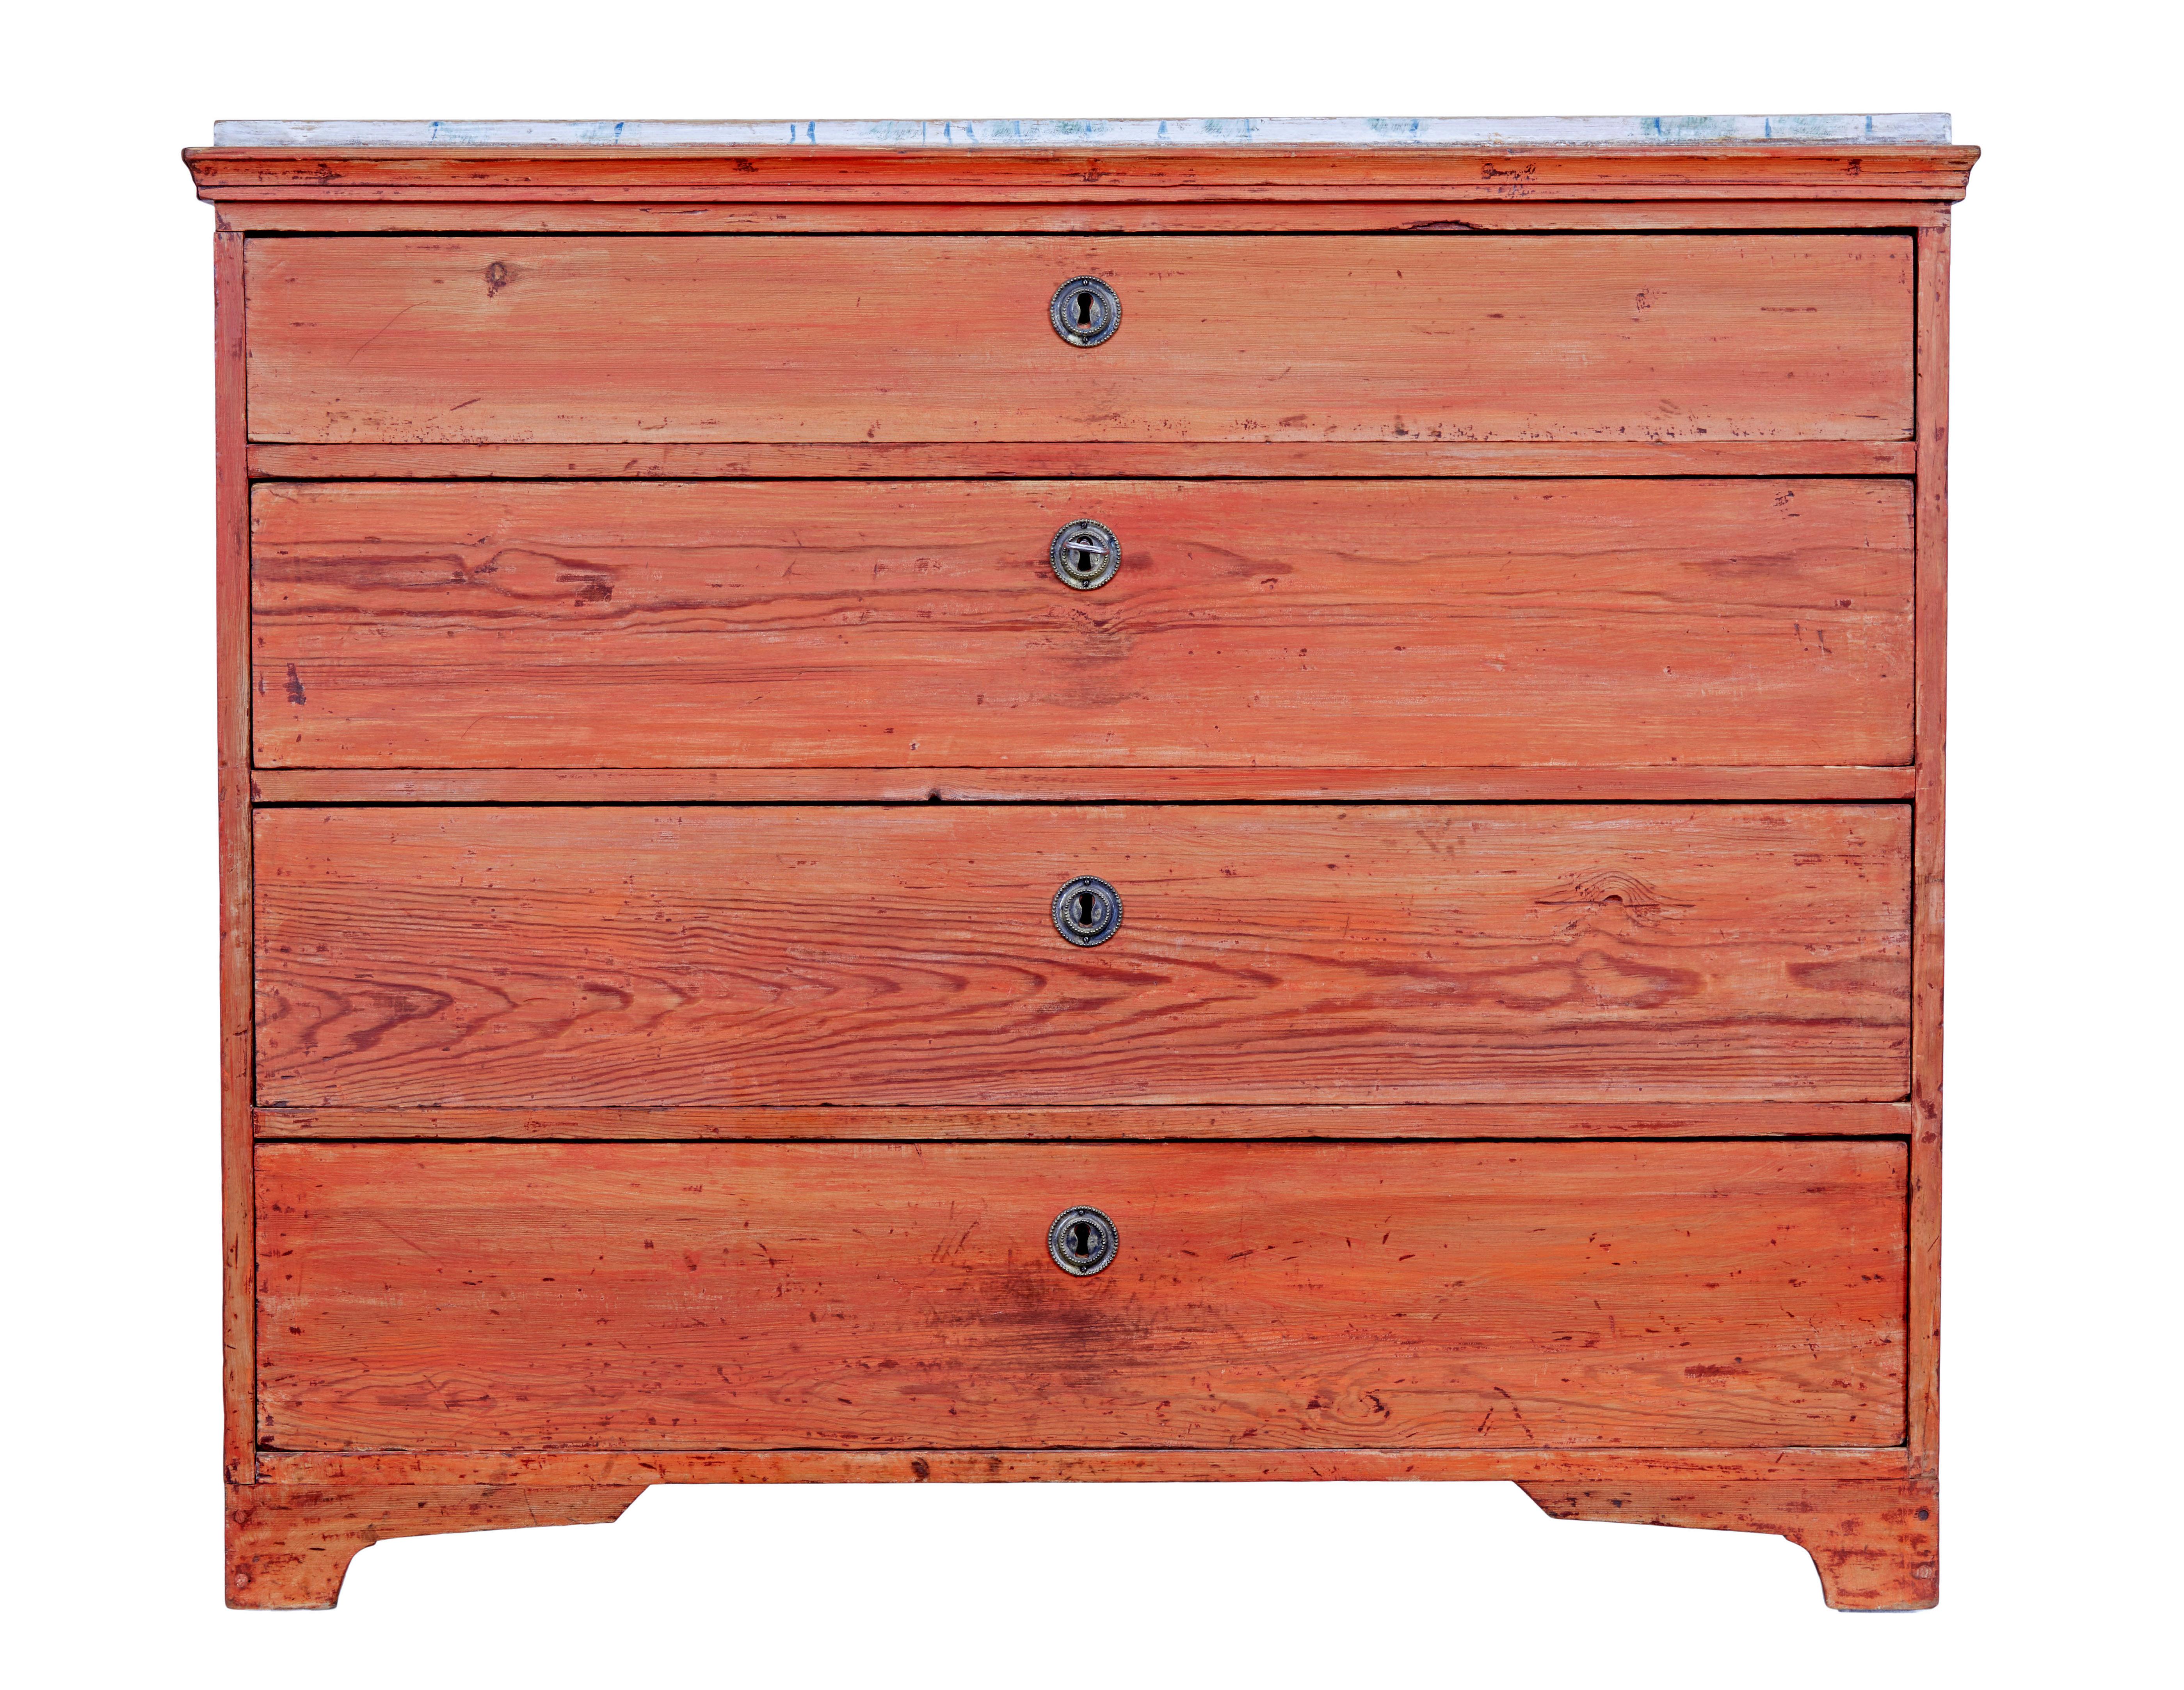 Swedish early 19th century painted pine chest of drawers circa 1800.

Fine quality chest of drawers, fitted with 4 graduating drawers that open on the key.  Bold red paint that has worn through, now showing the grain of wood underneath.  Contrasting